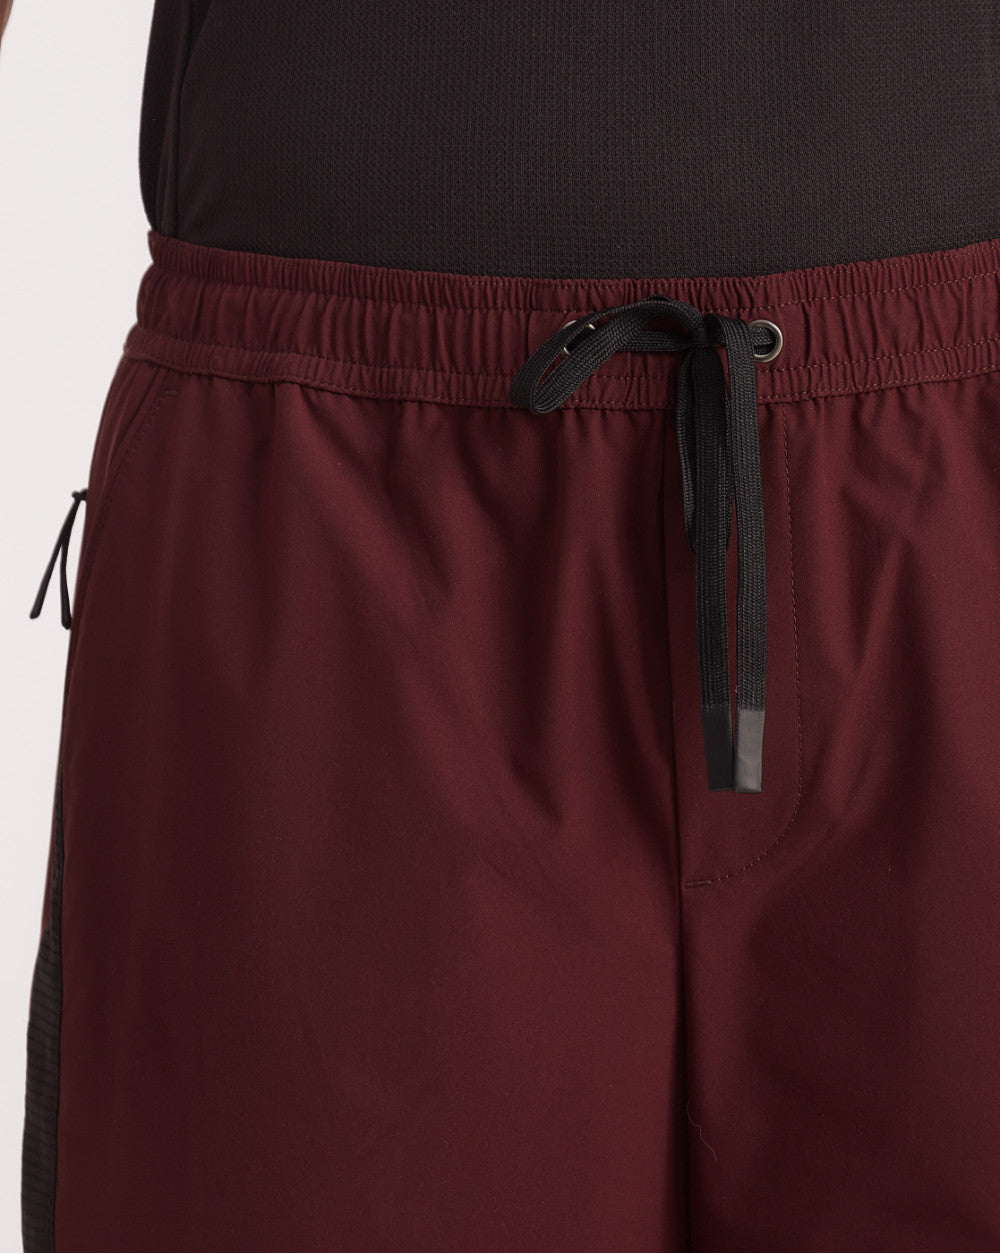 Regular Fit All-Day Track Pants - Maroon